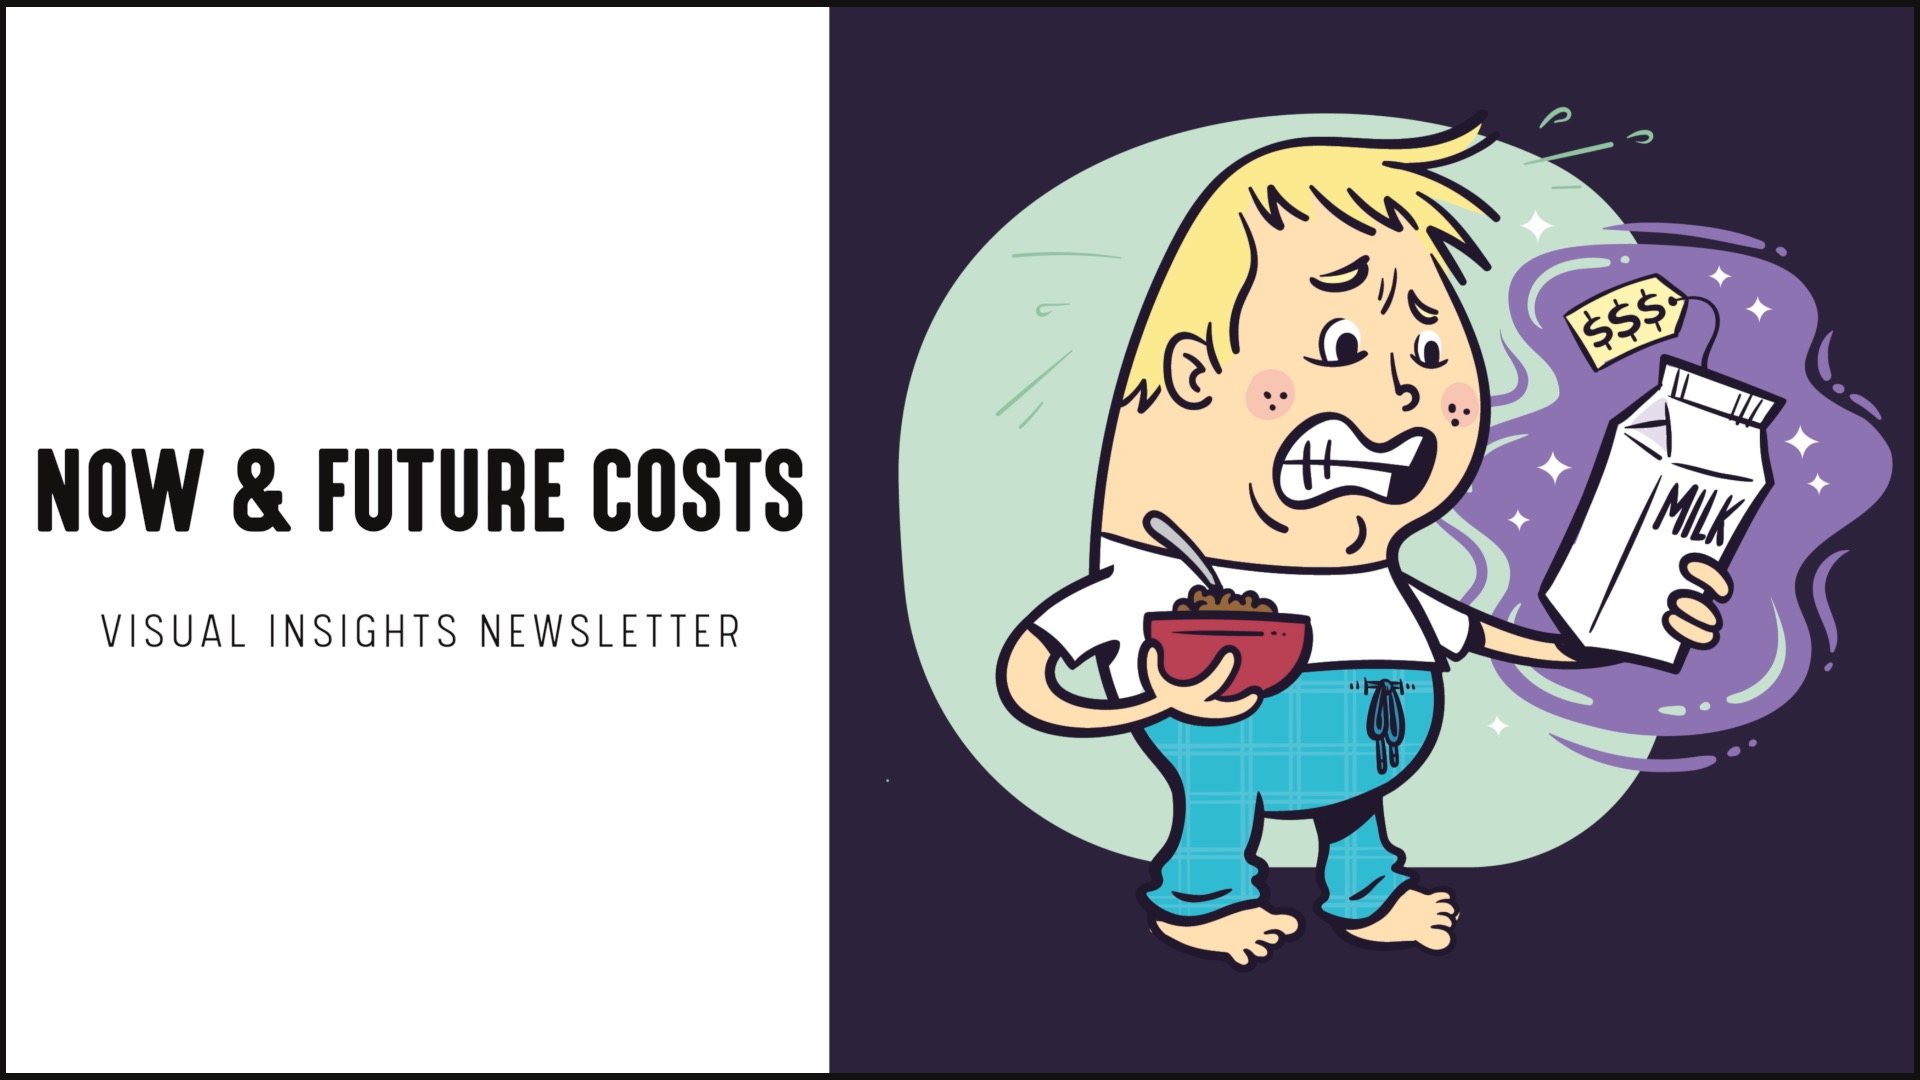 [NEW] Visual Insights Newsletter | Now and Future Costs